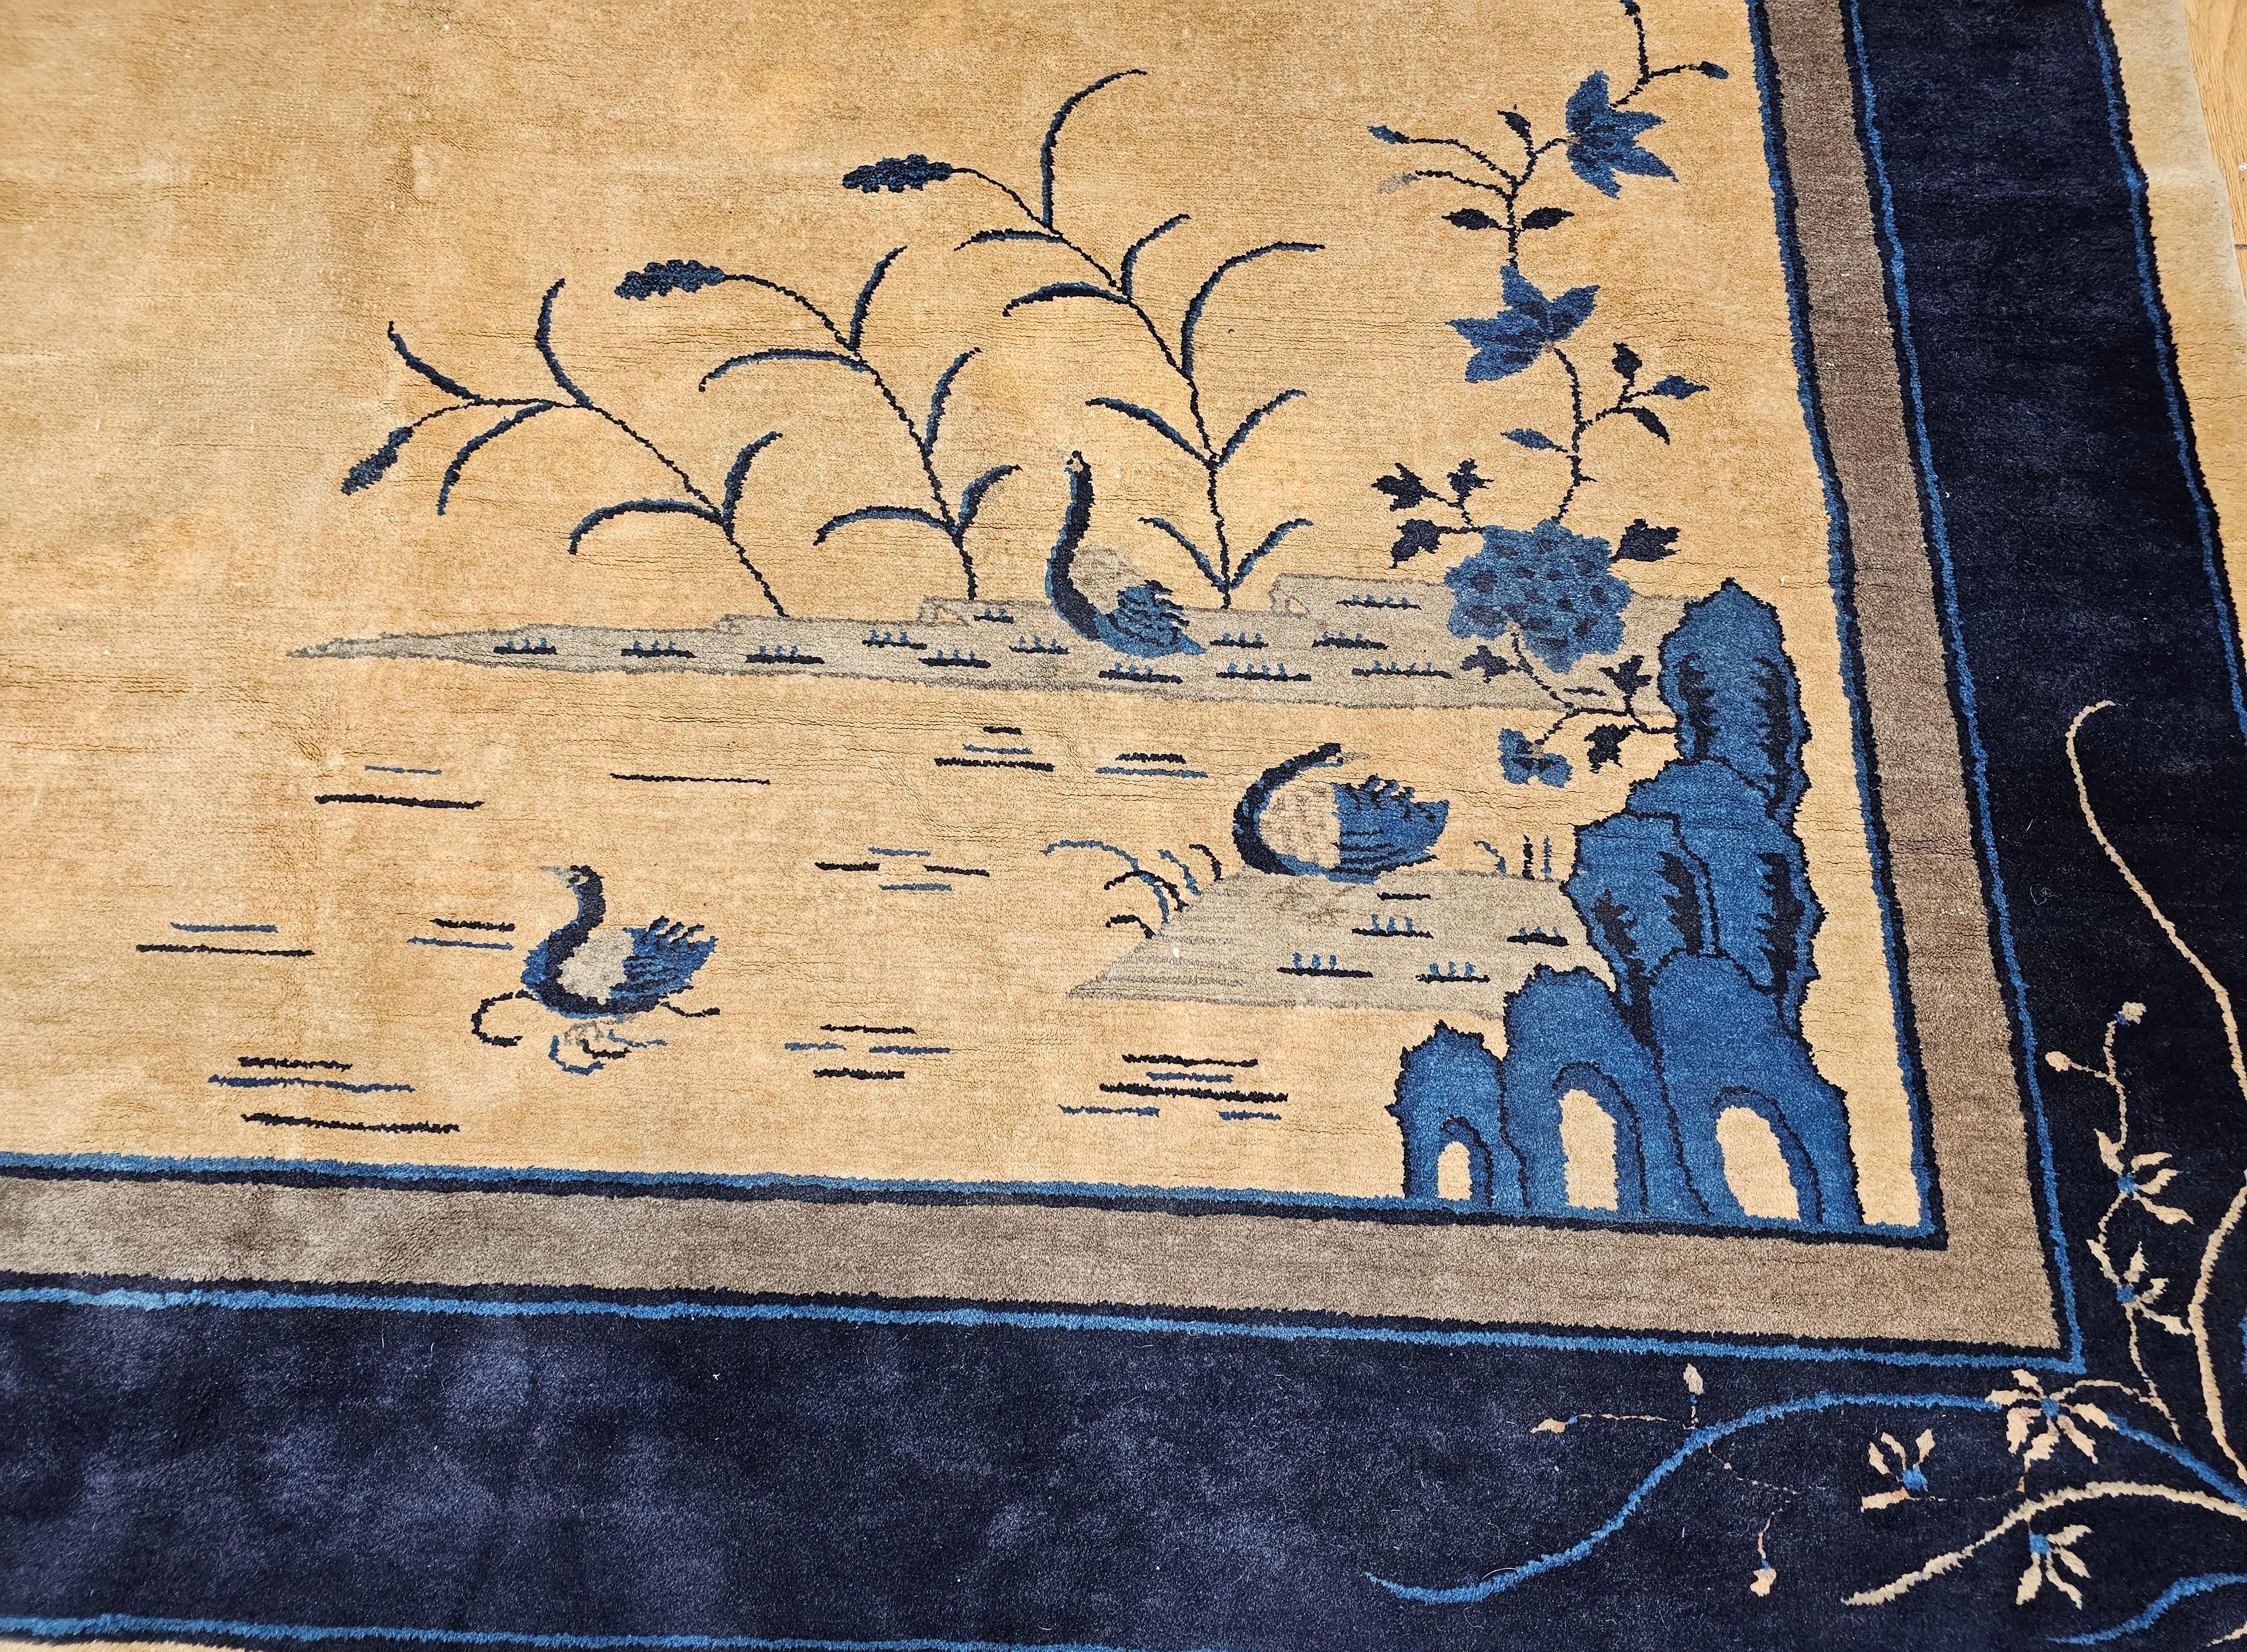 Vintage Art Deco Chinese Rug with Cranes, Pagoda, Mountains in Wheat, Blue, Navy For Sale 2